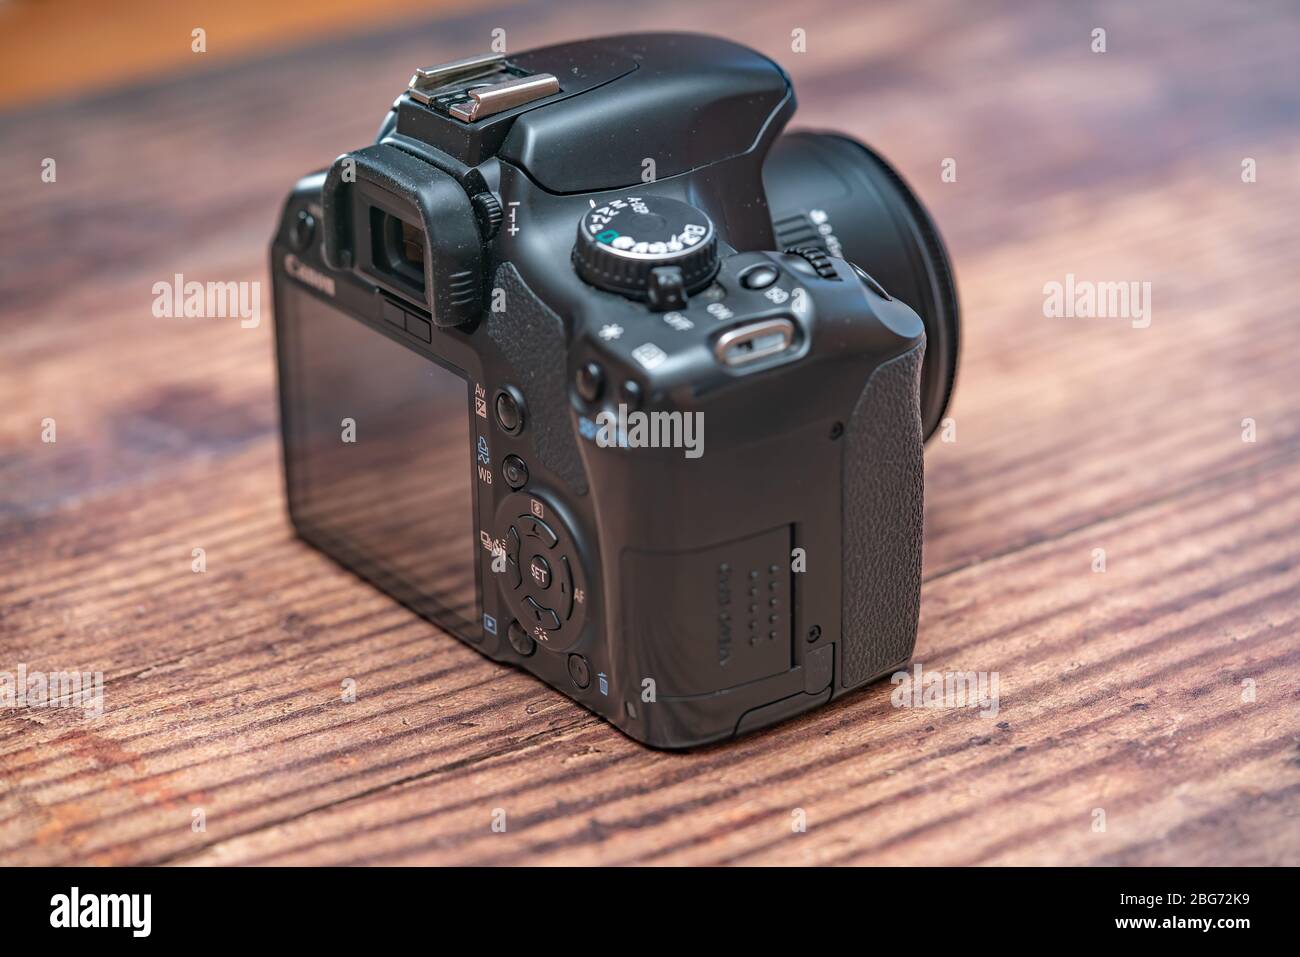 Norwich, Norfolk, UK – April 19 2020. The rear of a classic Canon EOS dslr camera on a wooden background with intentional close and selective focus Stock Photo